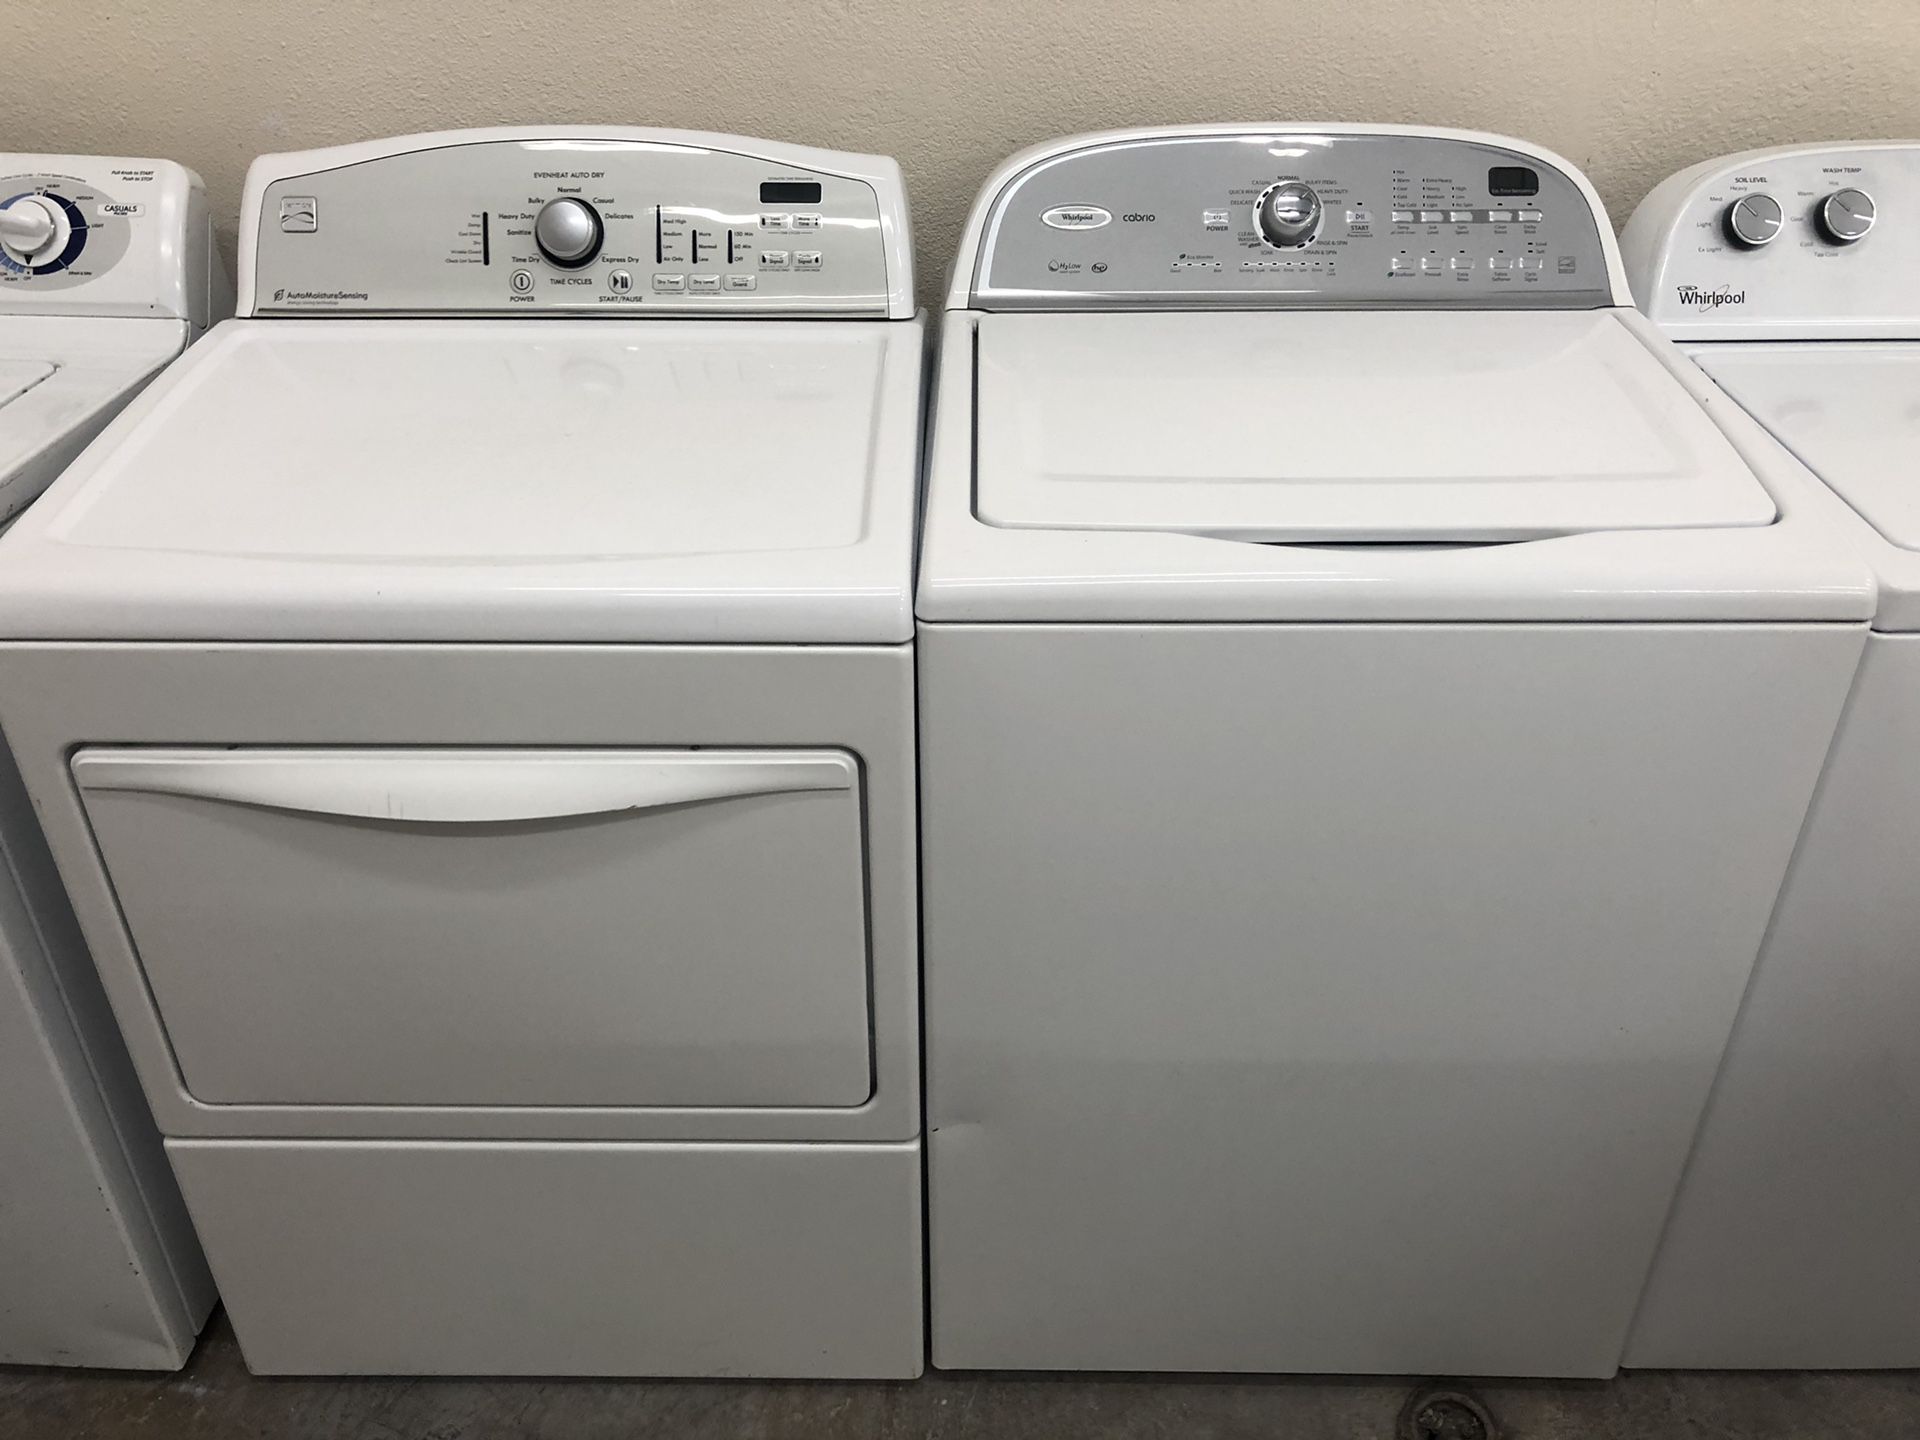 Whirlpool Washer And Kenmore Dryer Mix